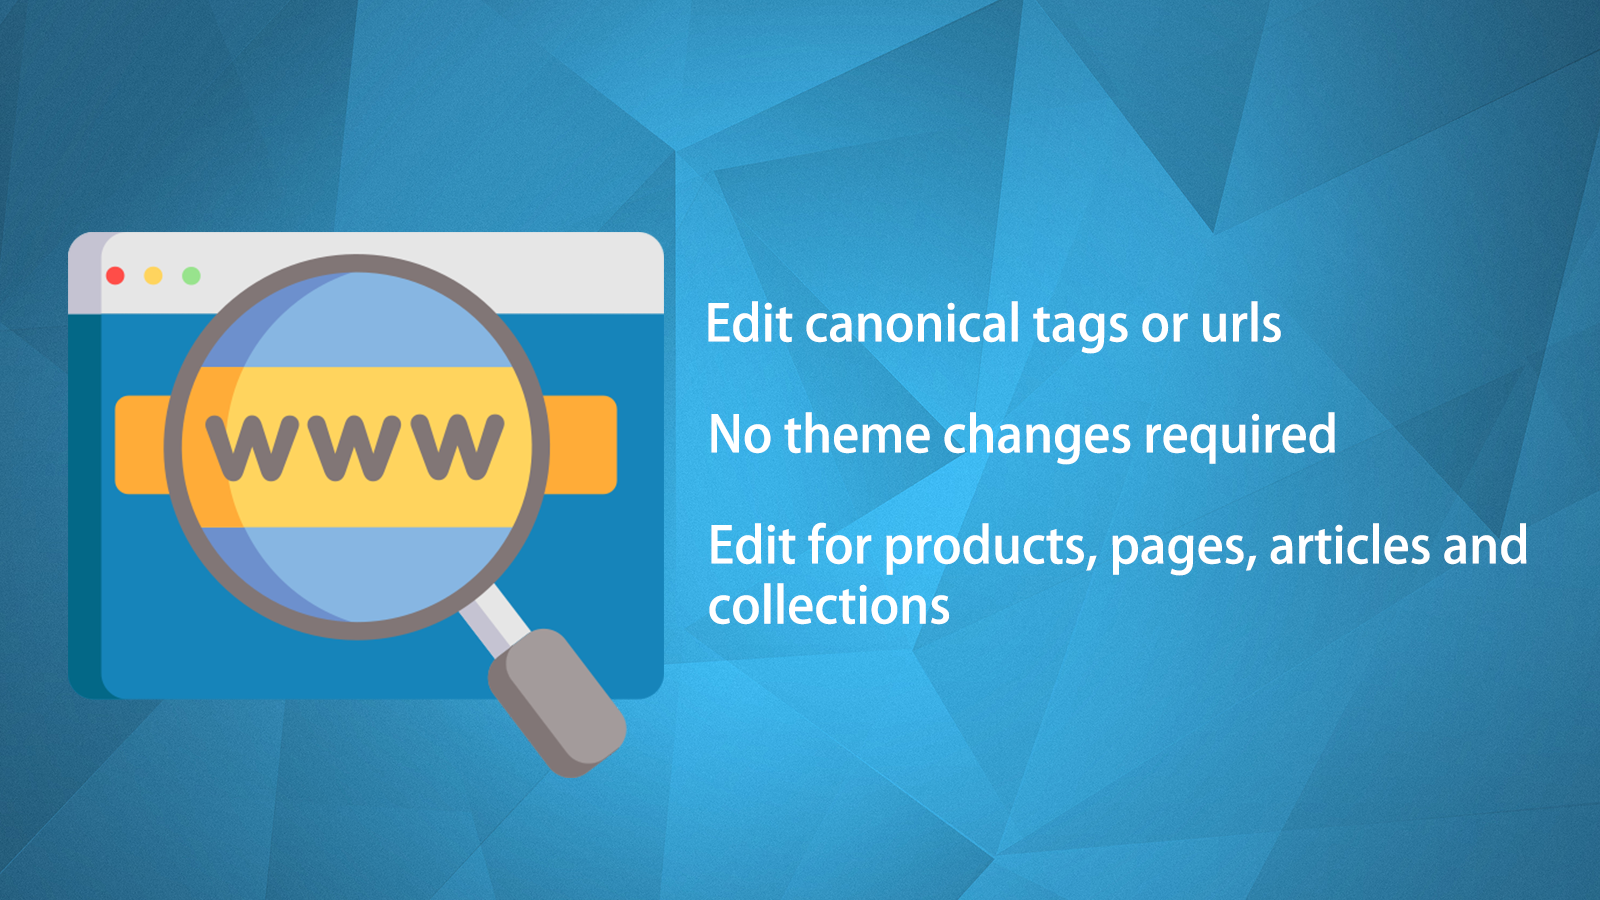 Edit canonical urls and tags for products, pages and more